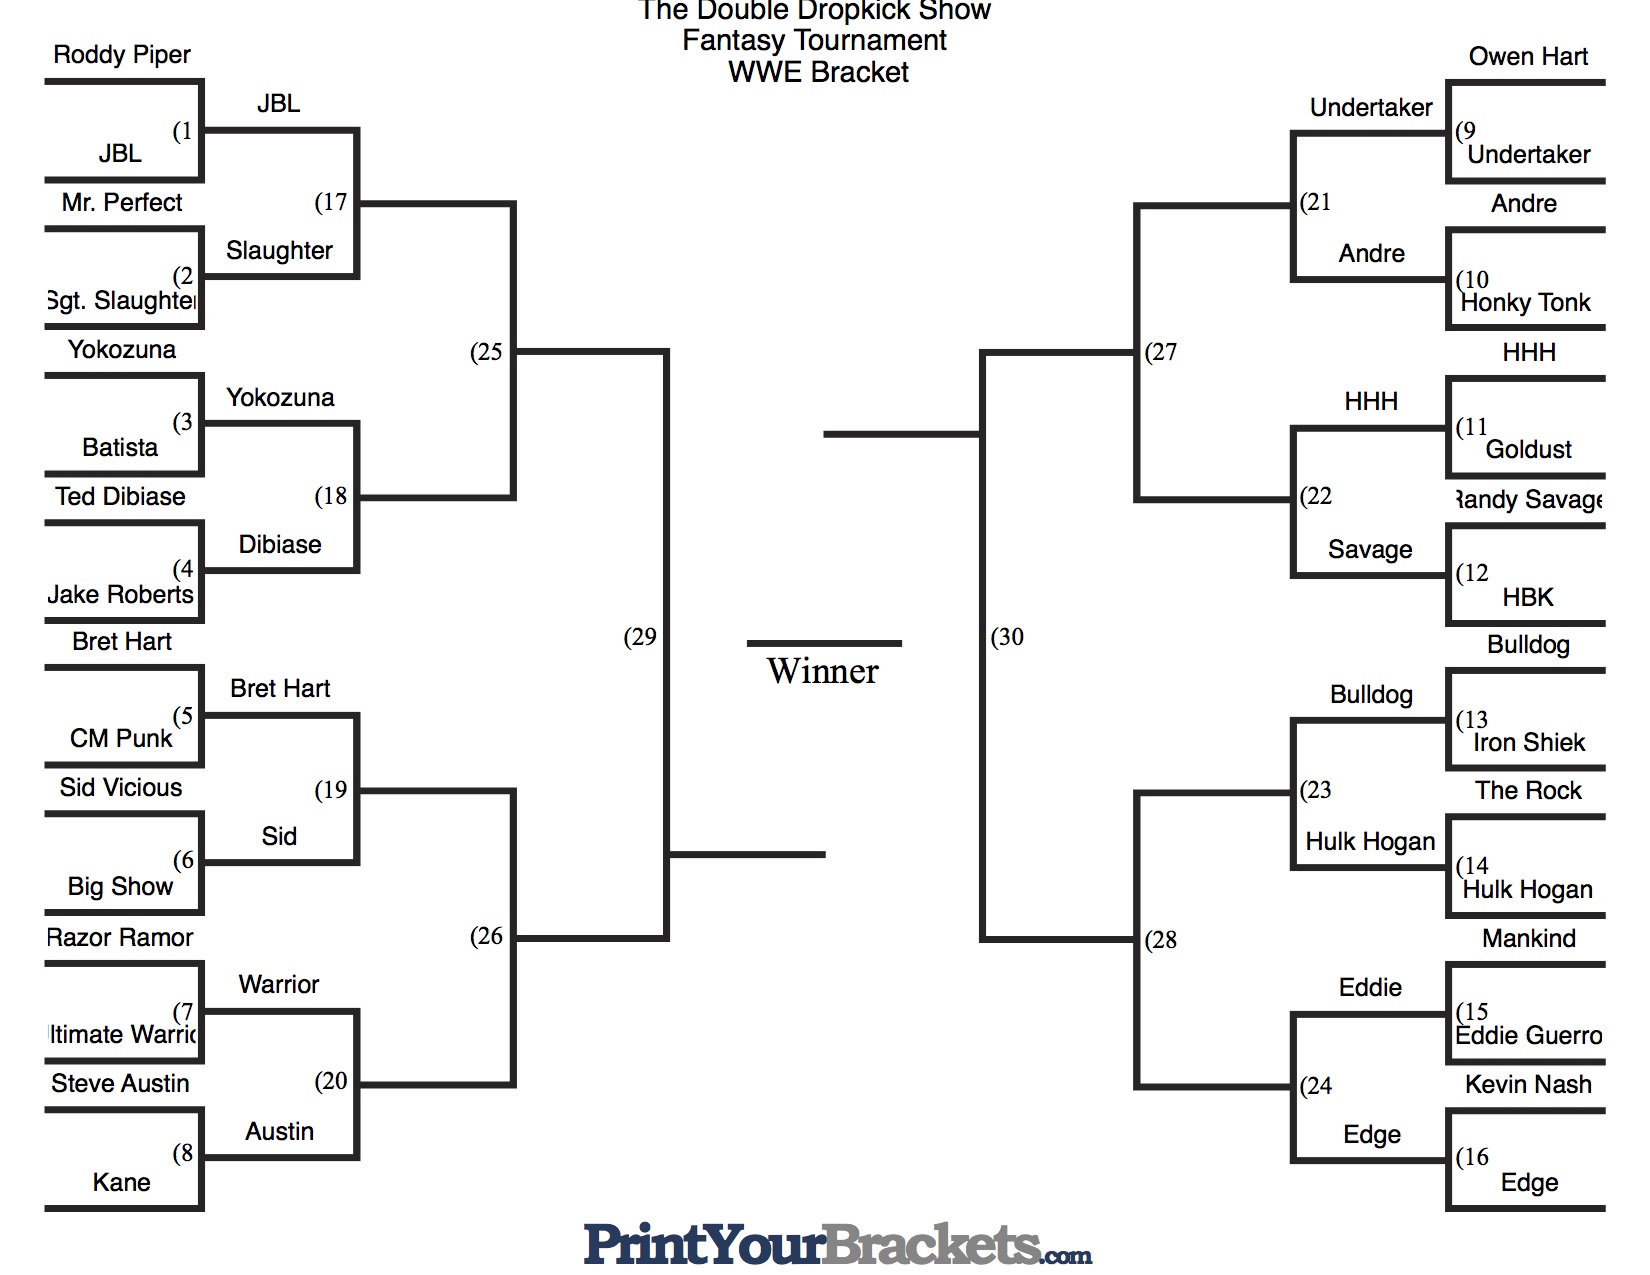 161 The WWE Bracket of our Fantasy Tournament. The Double Dropkick Show